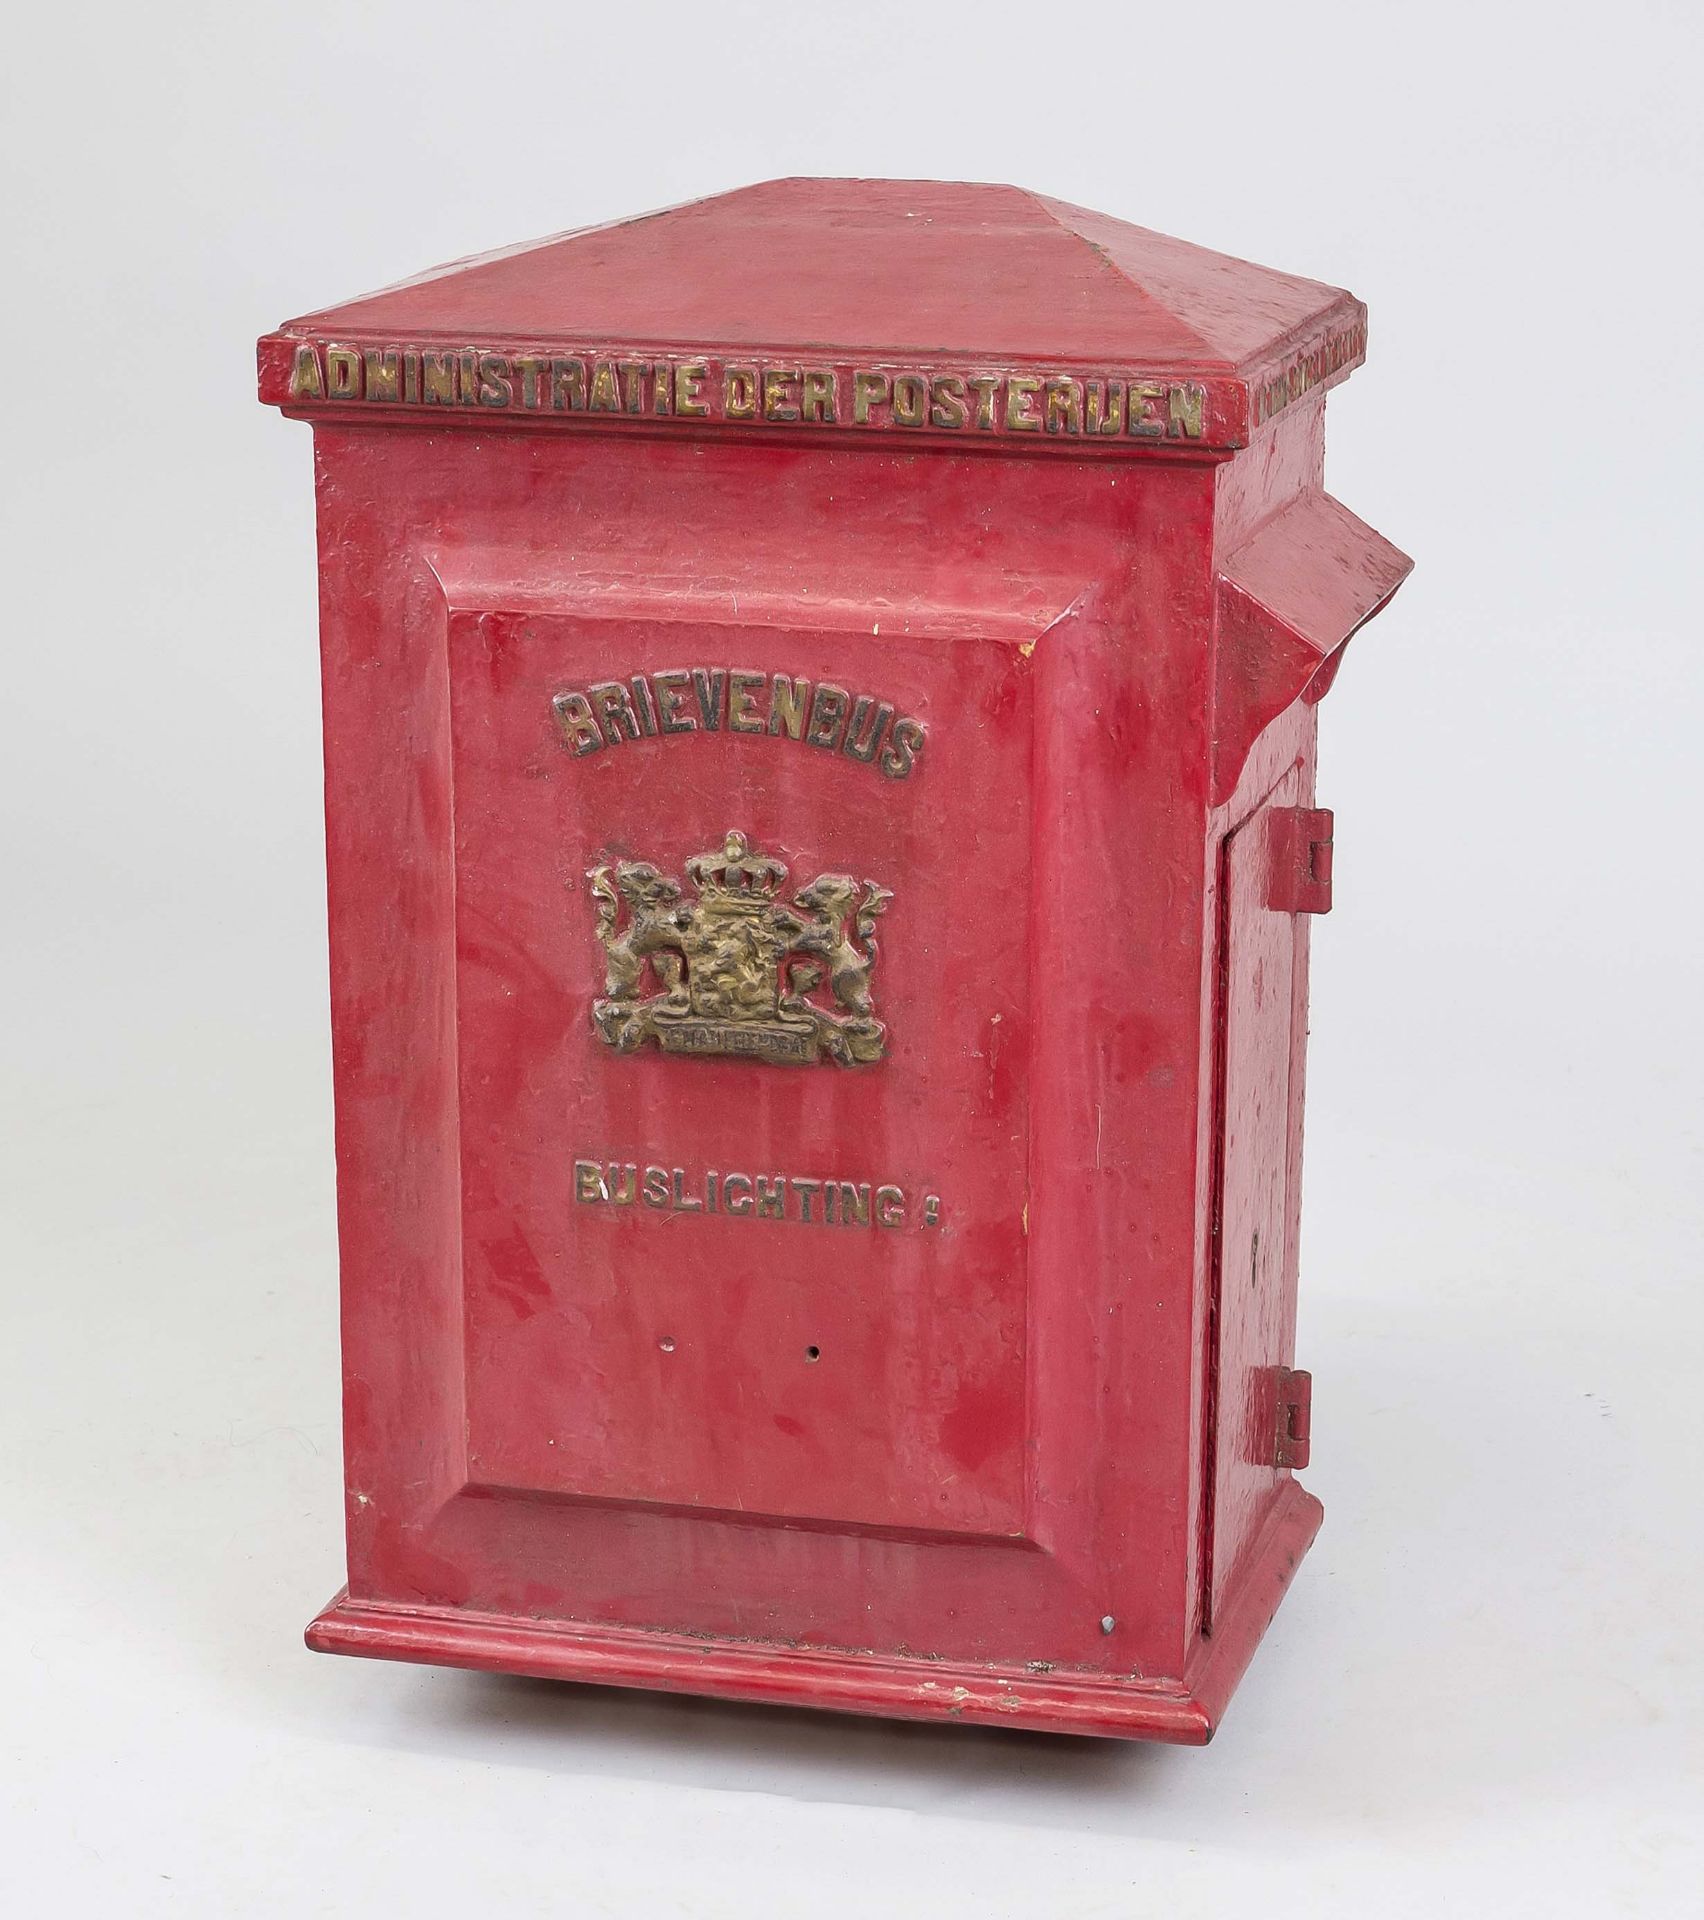 Large letterbox, Holland 19th/20th century, cast iron painted red and gold, lettering and coat of